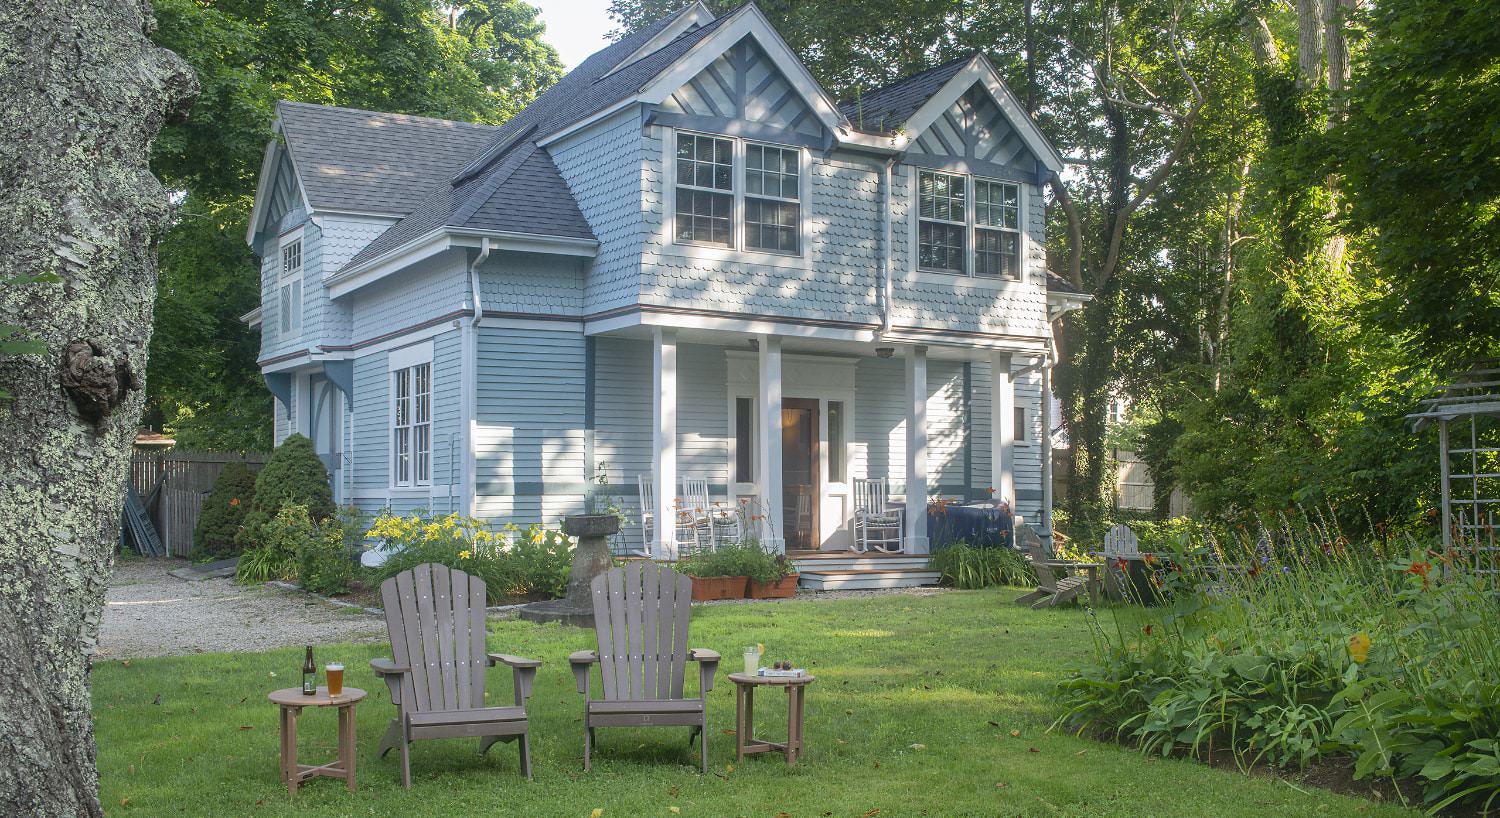 Exterior view of property painted light blue with white trim surrounded by large green trees and green yard with two Adirondack chairs